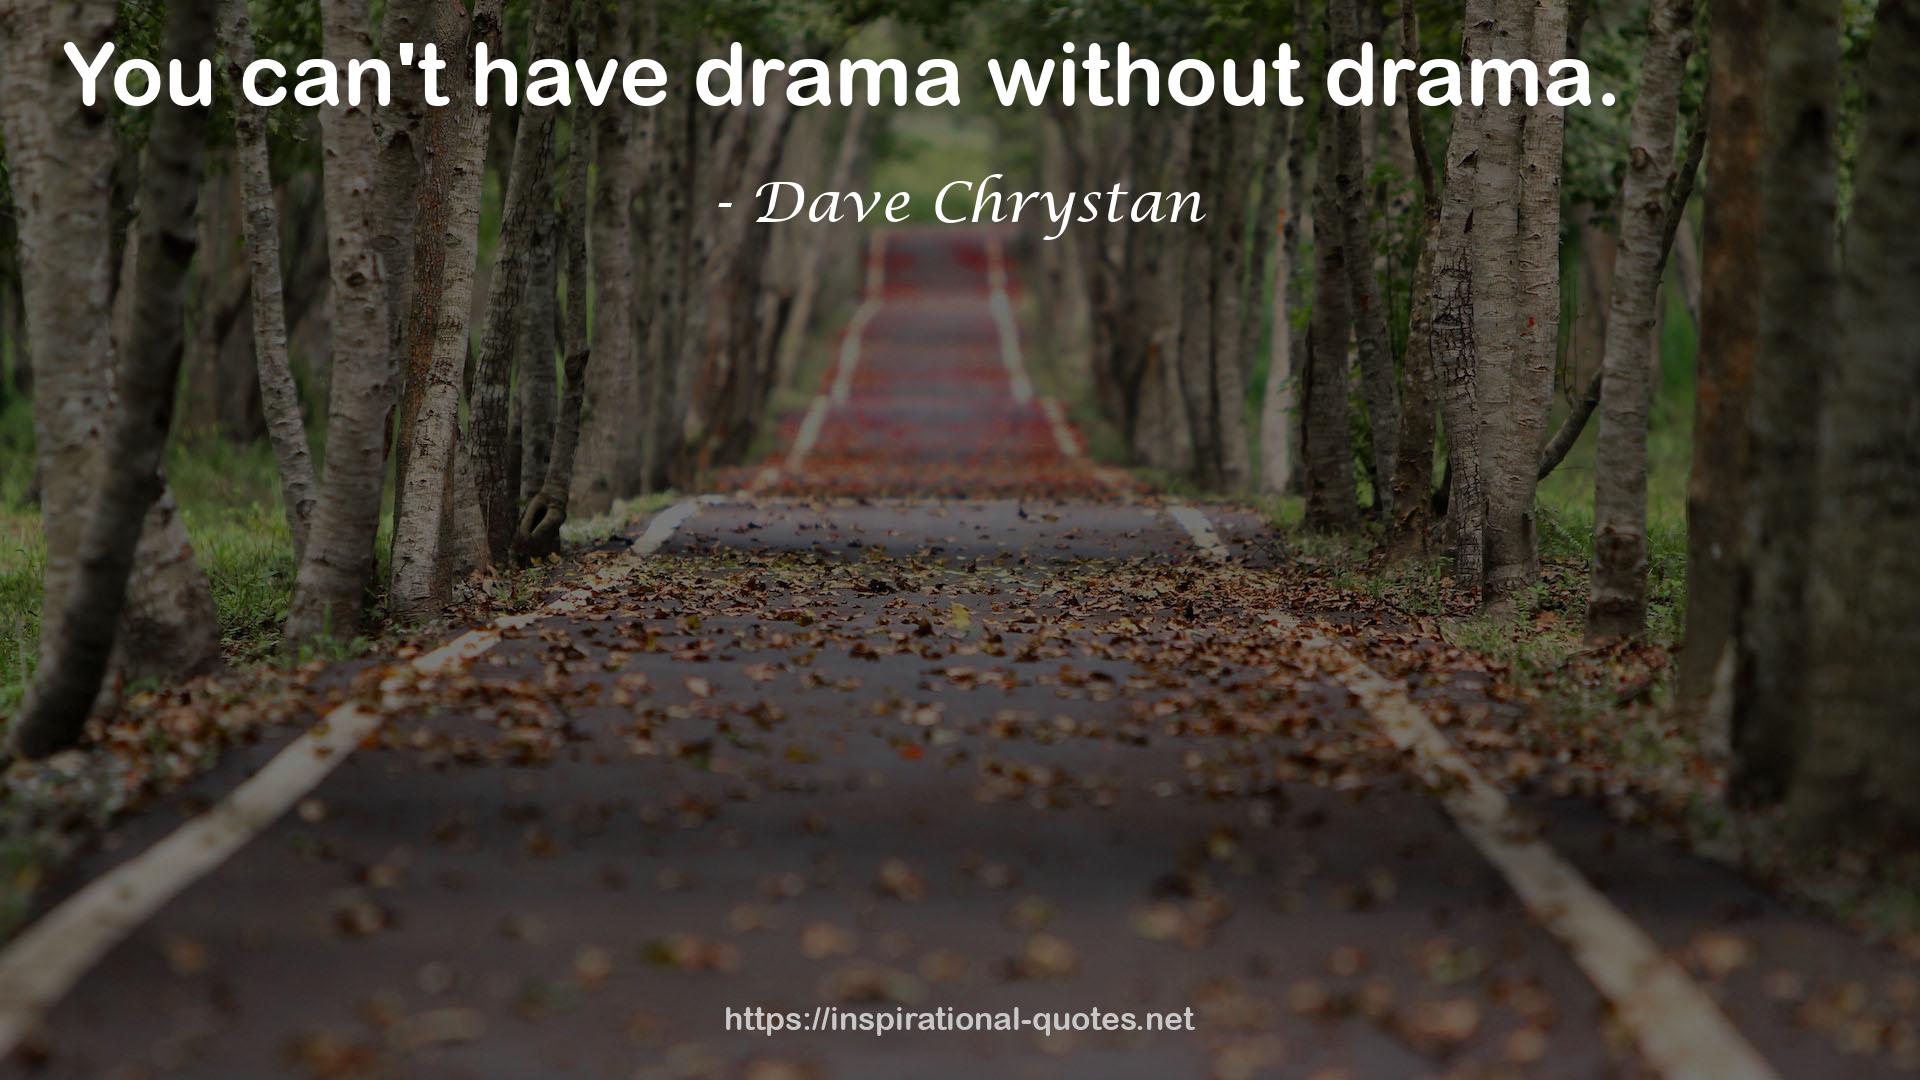 Dave Chrystan QUOTES